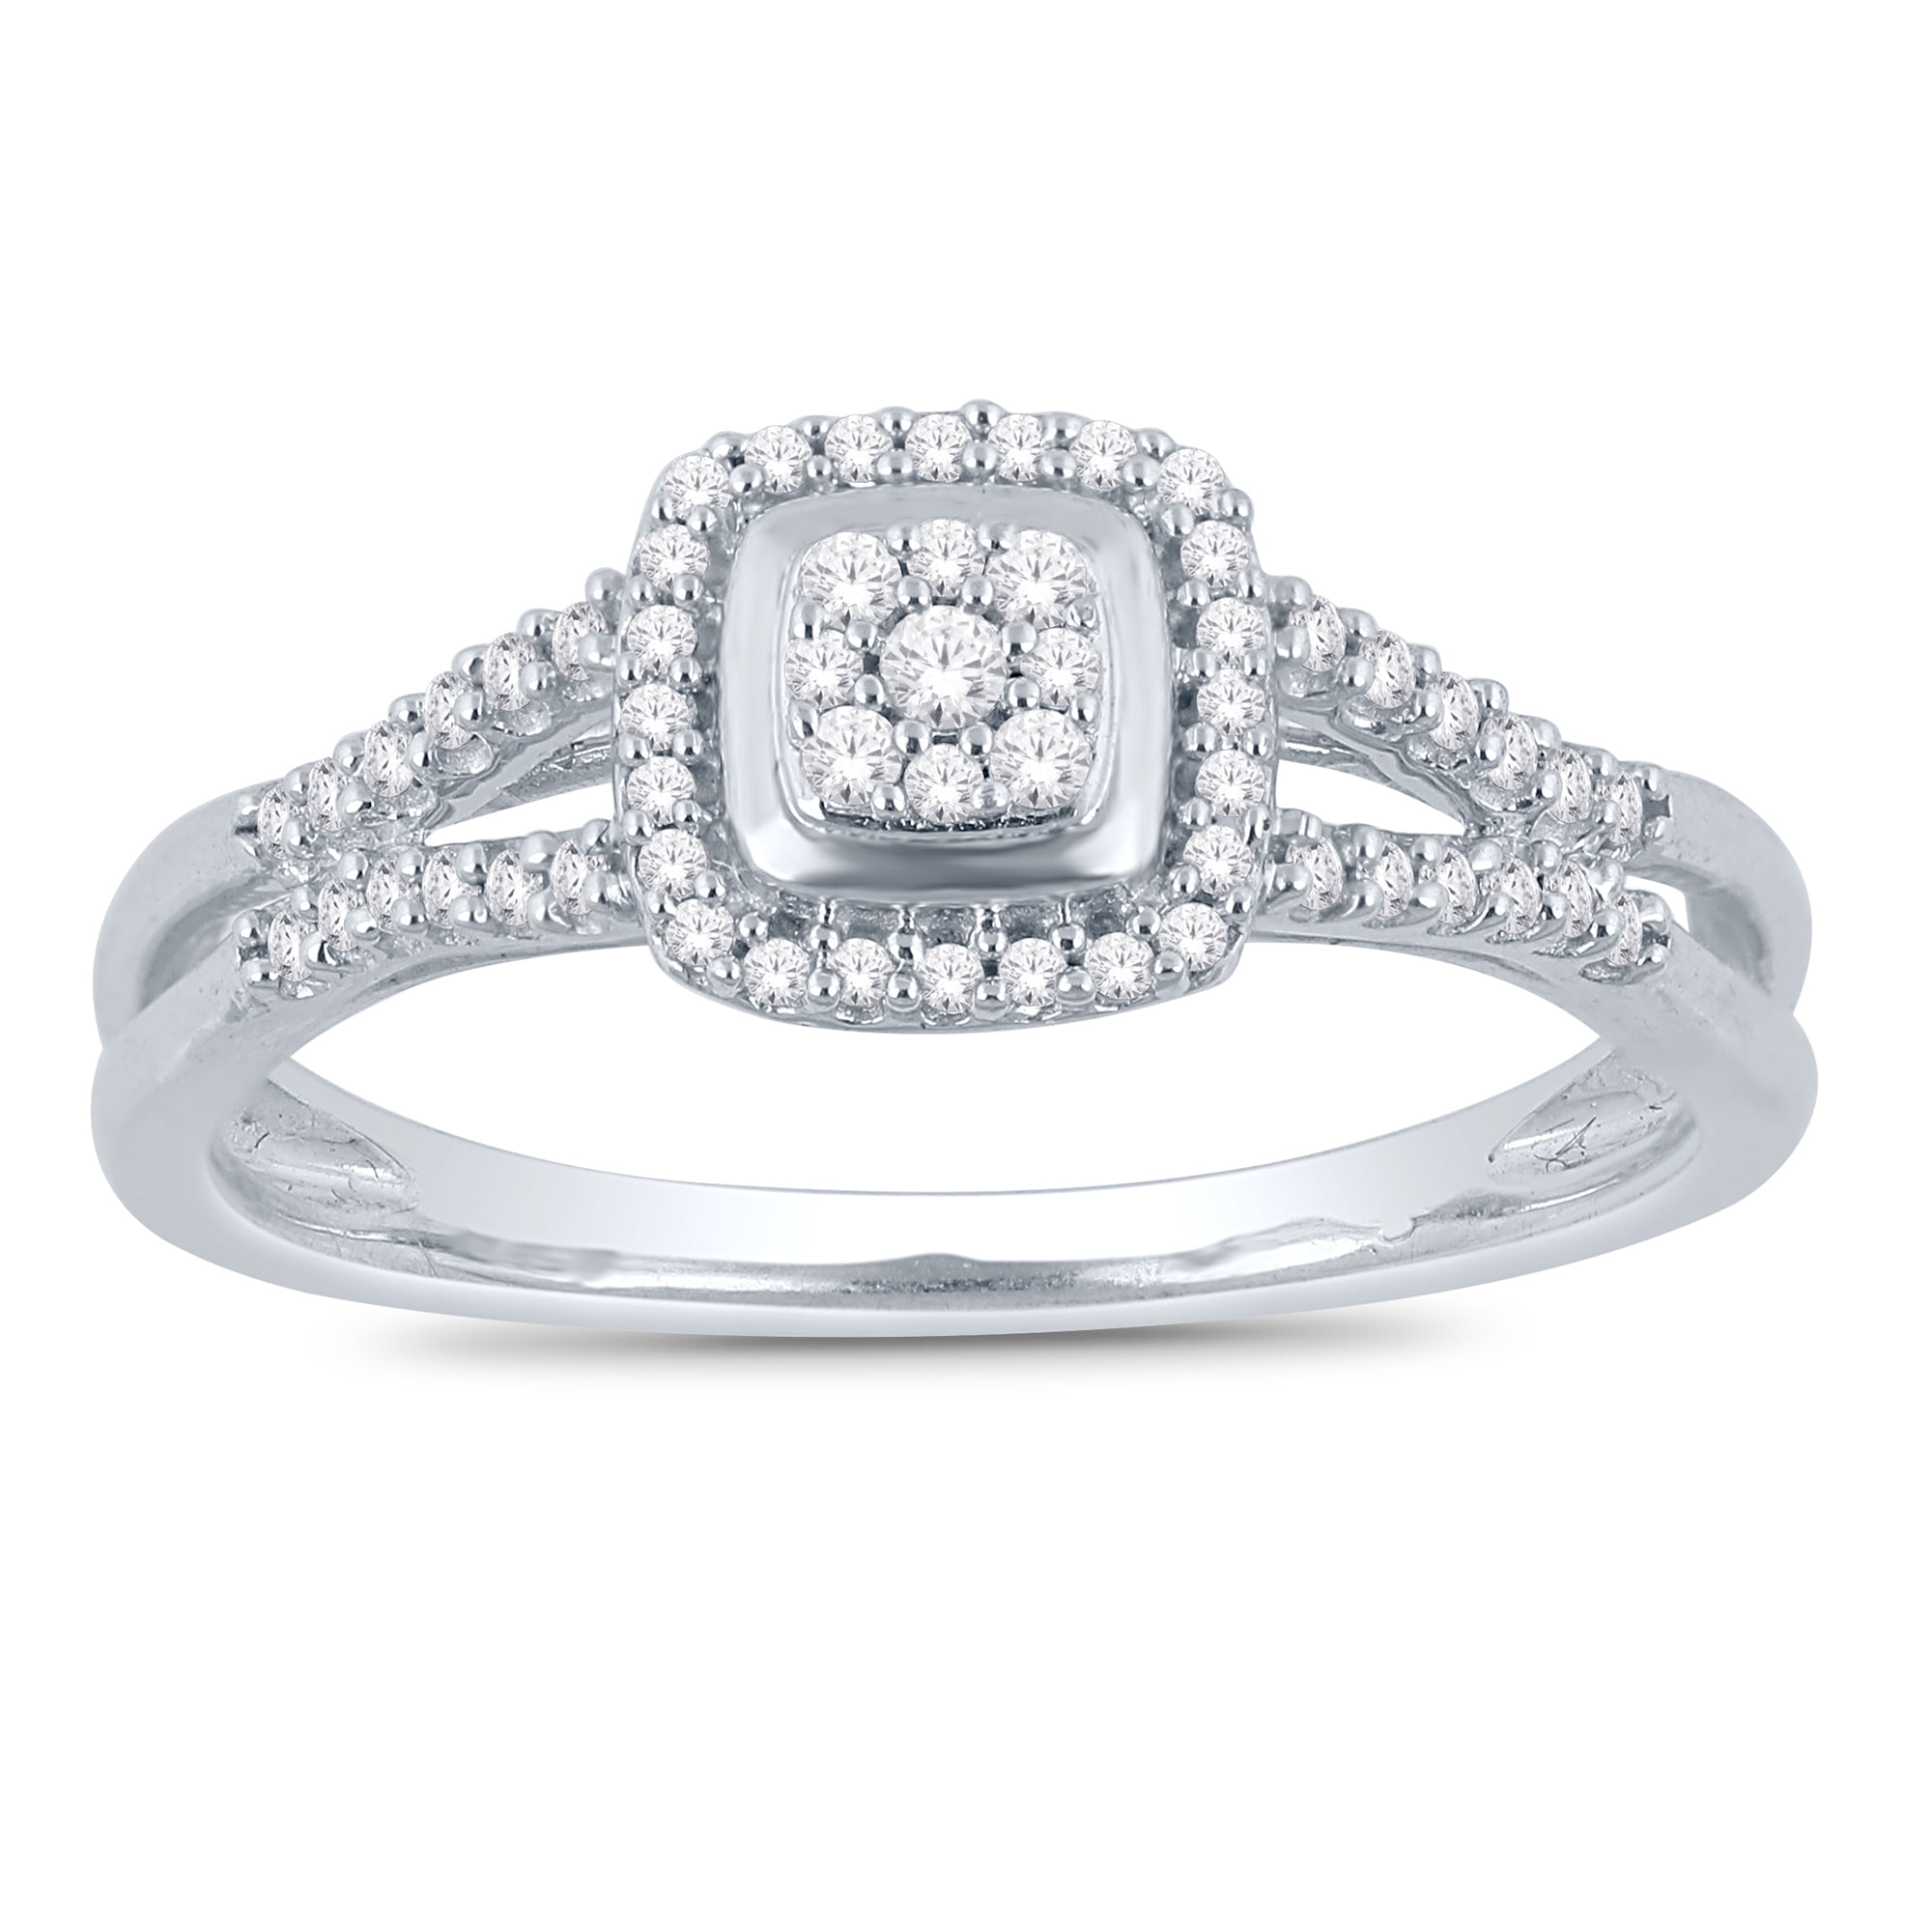 Her Special Day 1/5 CT. T.W. Diamond Promise Ring in 10KT White Gold